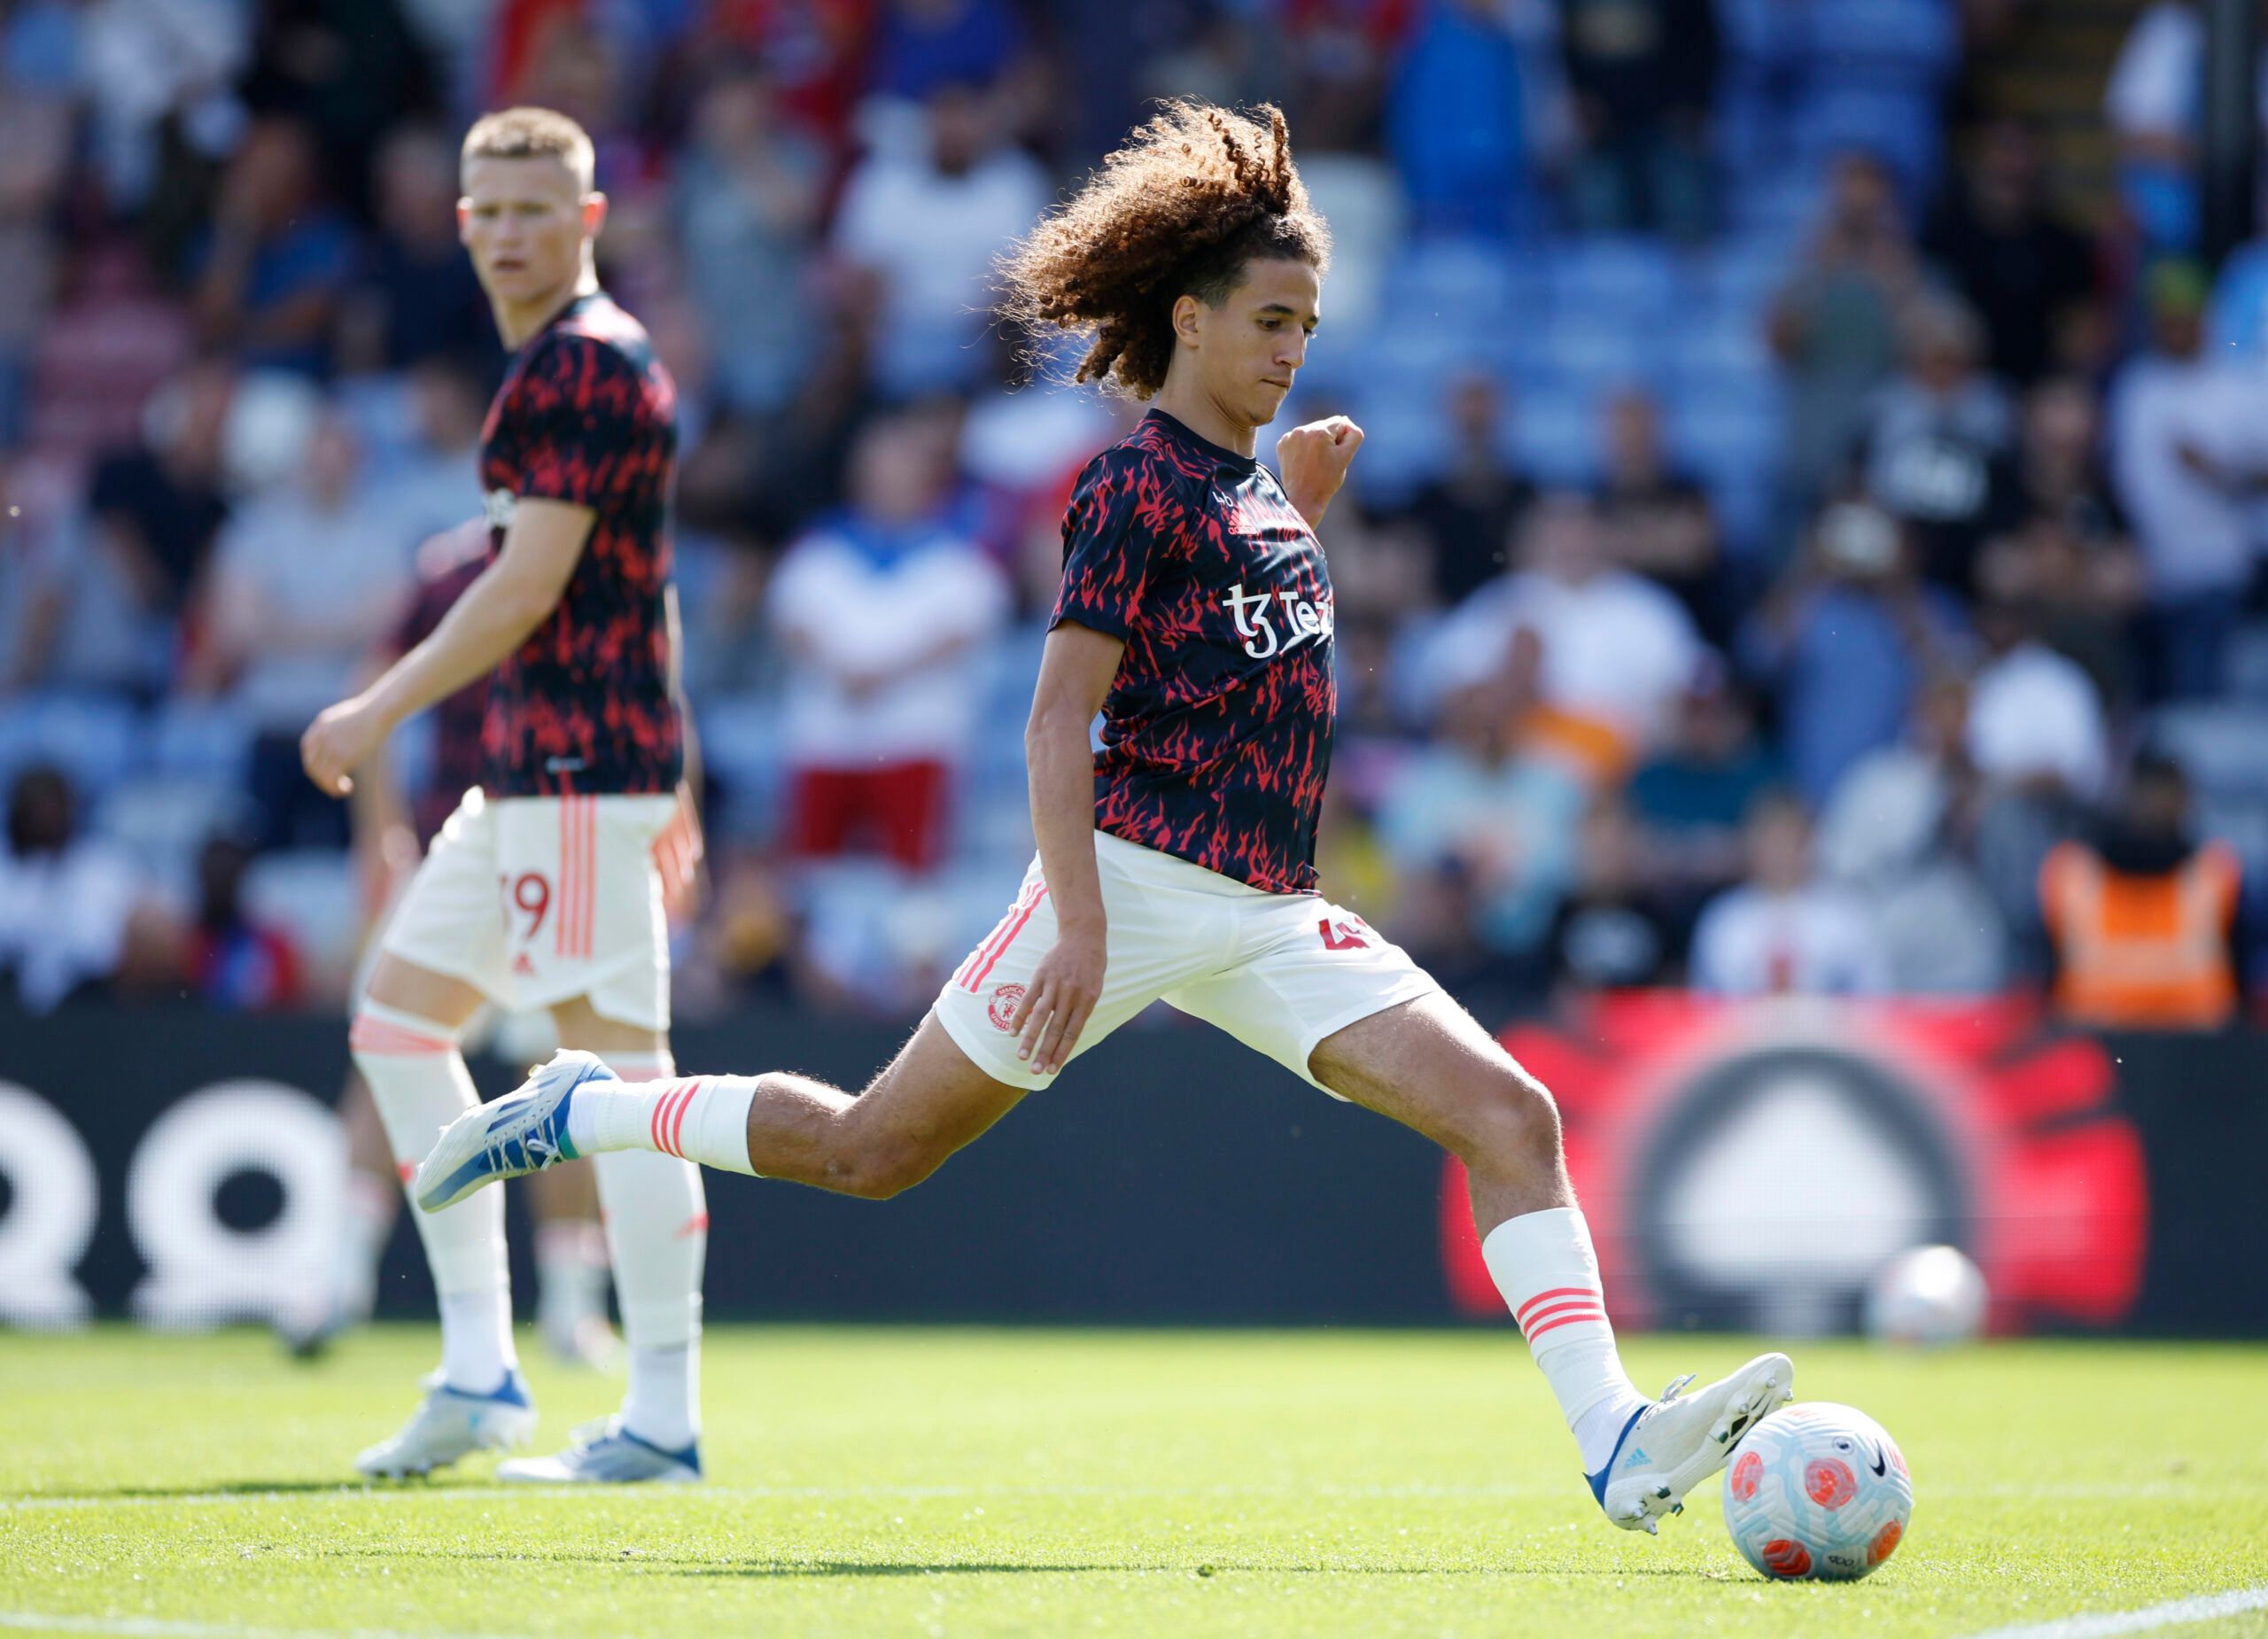 Soccer Football - Premier League - Crystal Palace v Manchester United - Selhurst Park, London, Britain - May 22, 2022 Manchester United's Hannibal Mejbri during the warm up before the match Action Images via Reuters/John Sibley EDITORIAL USE ONLY. No use with unauthorized audio, video, data, fixture lists, club/league logos or 'live' services. Online in-match use limited to 75 images, no video emulation. No use in betting, games or single club /league/player publications.  Please contact your ac